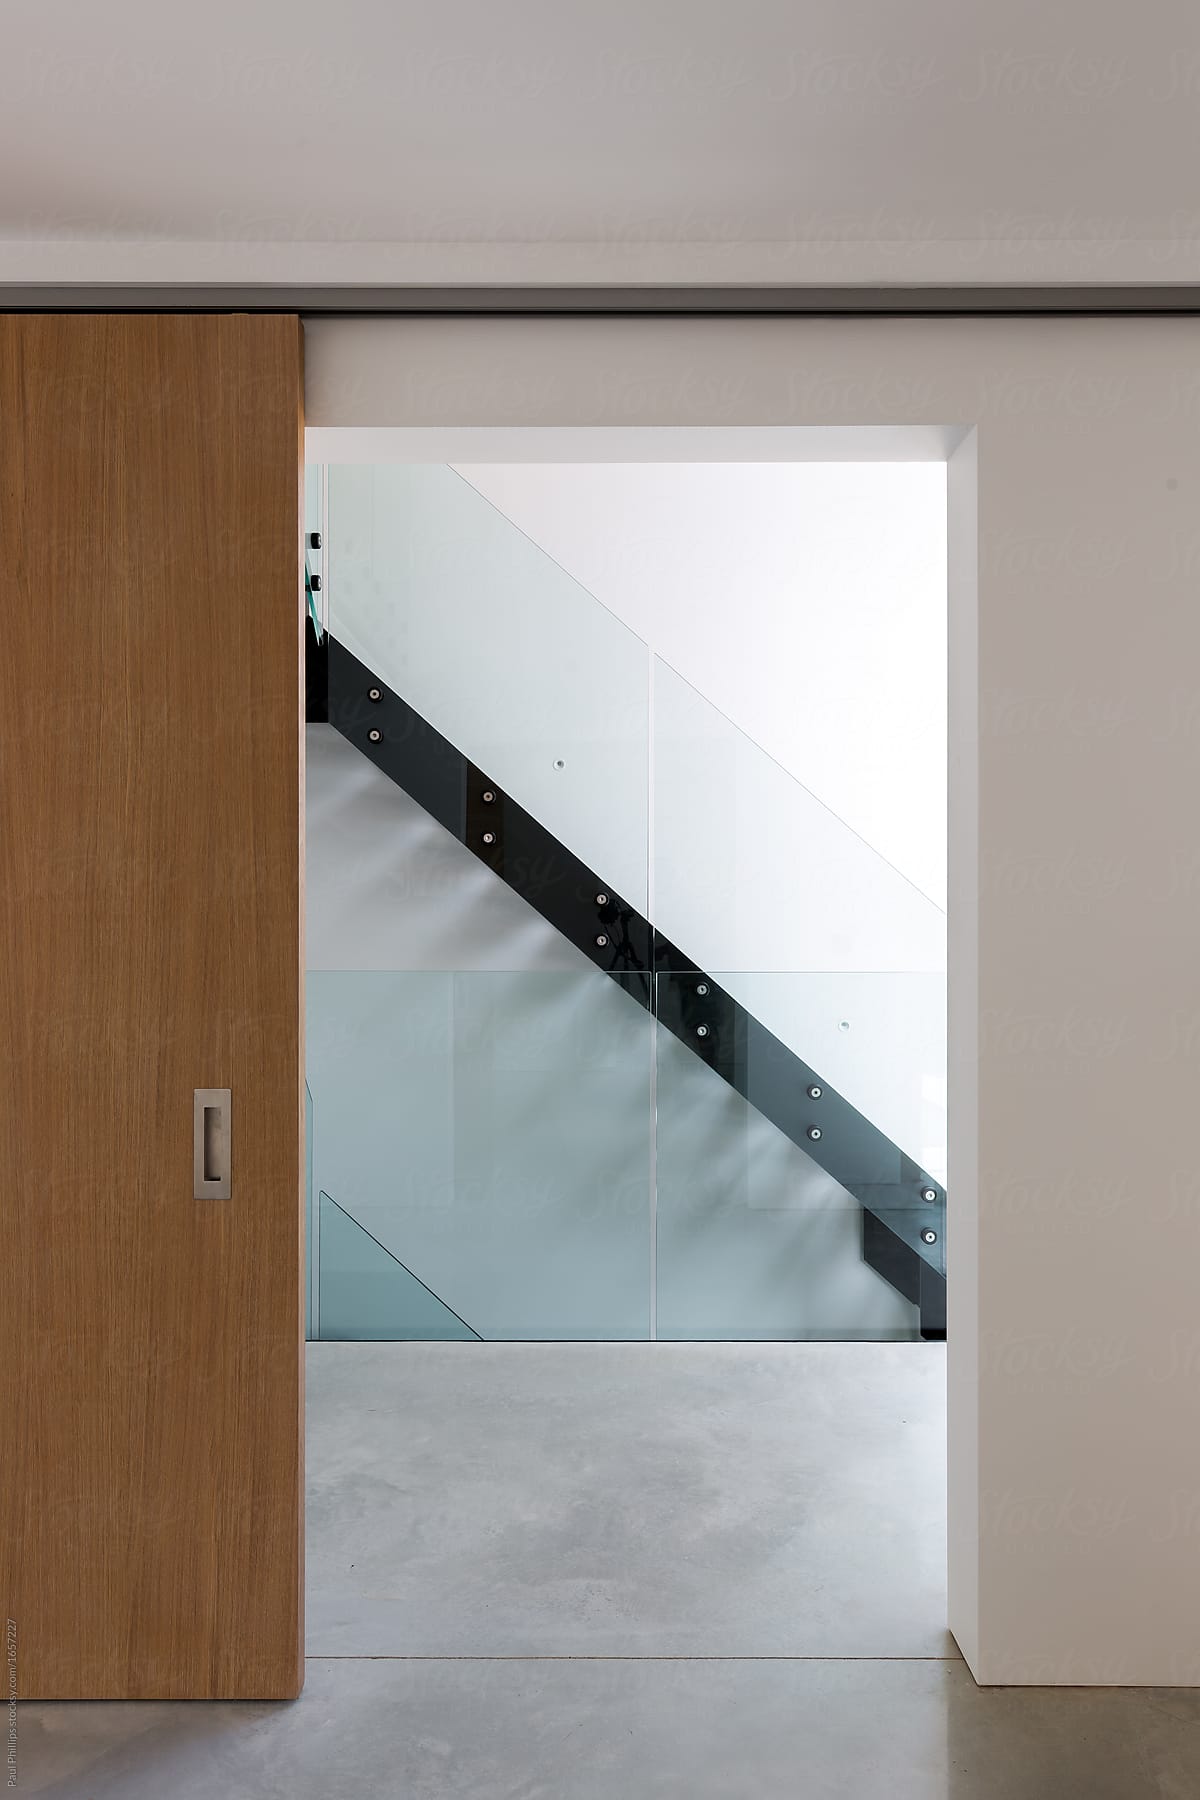 Simple domestic modern staircase viewed through a sliding door.